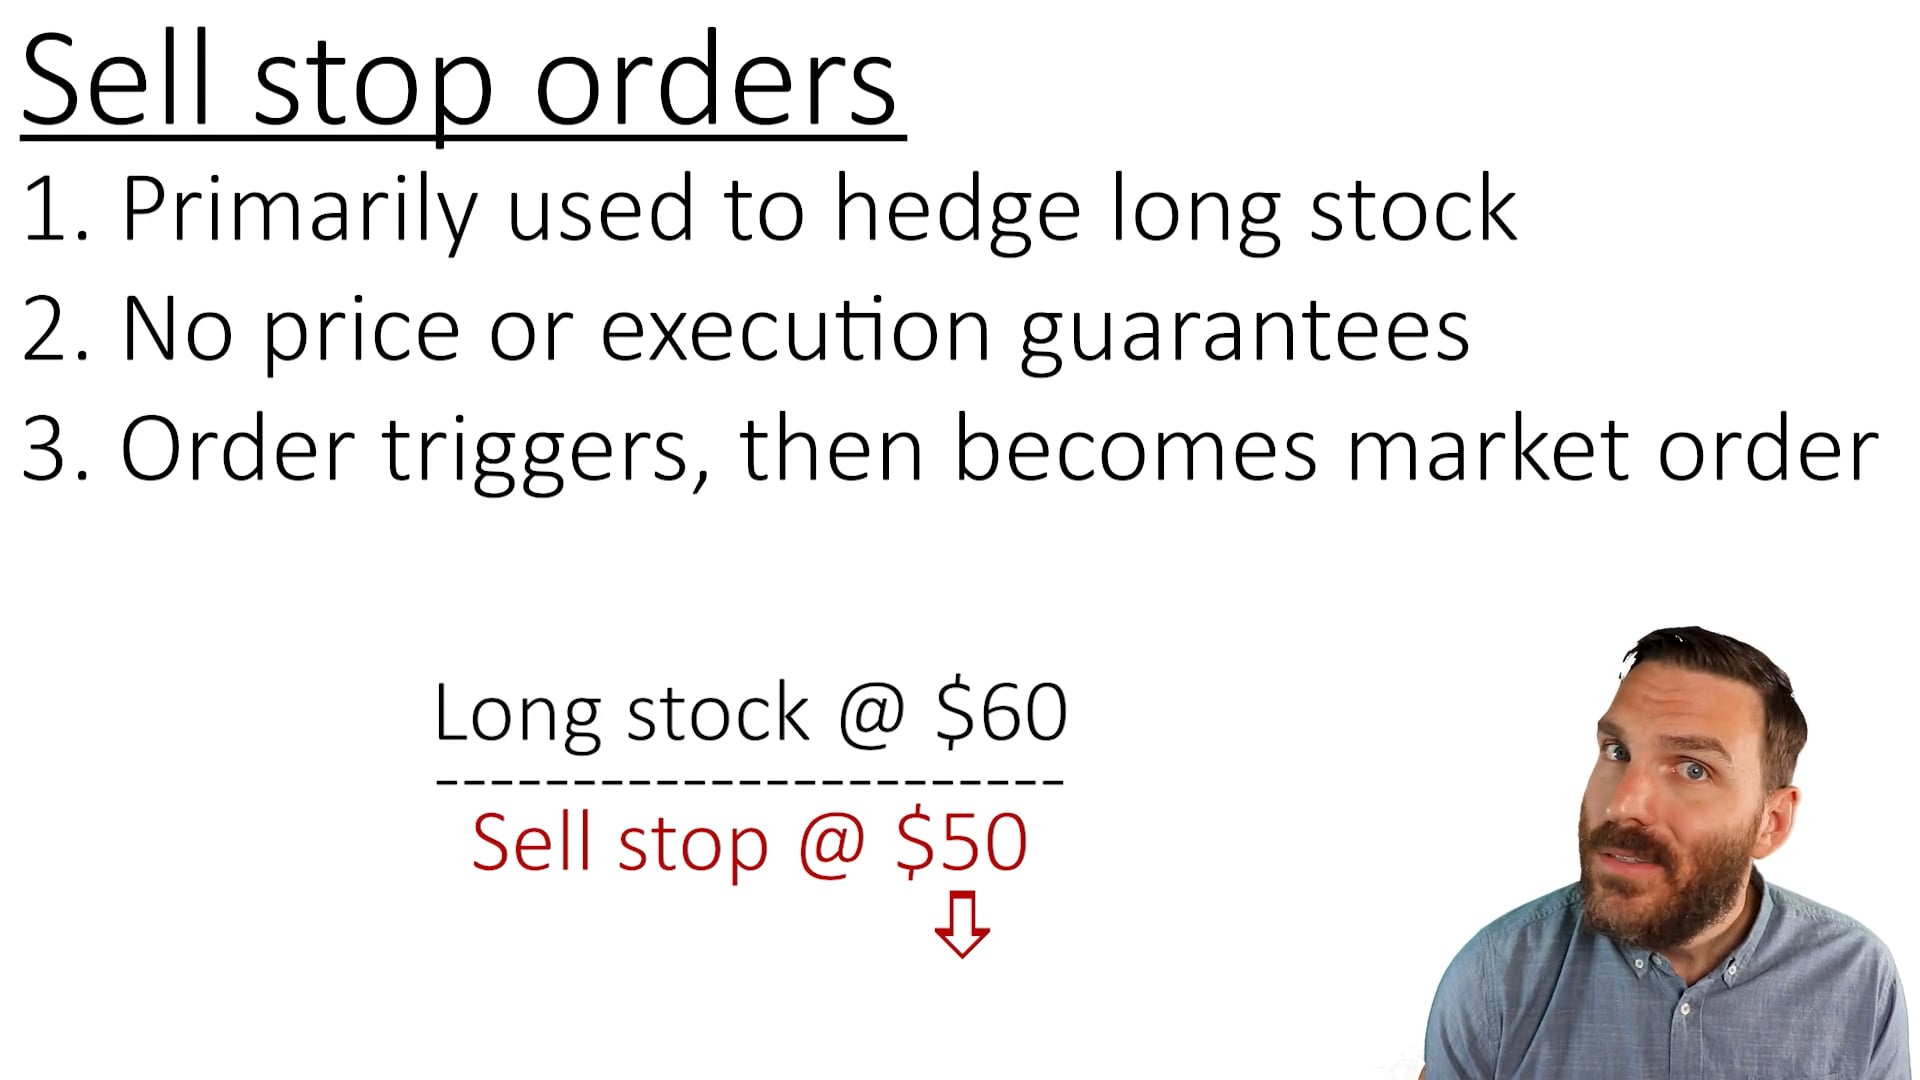 Sell stop orders